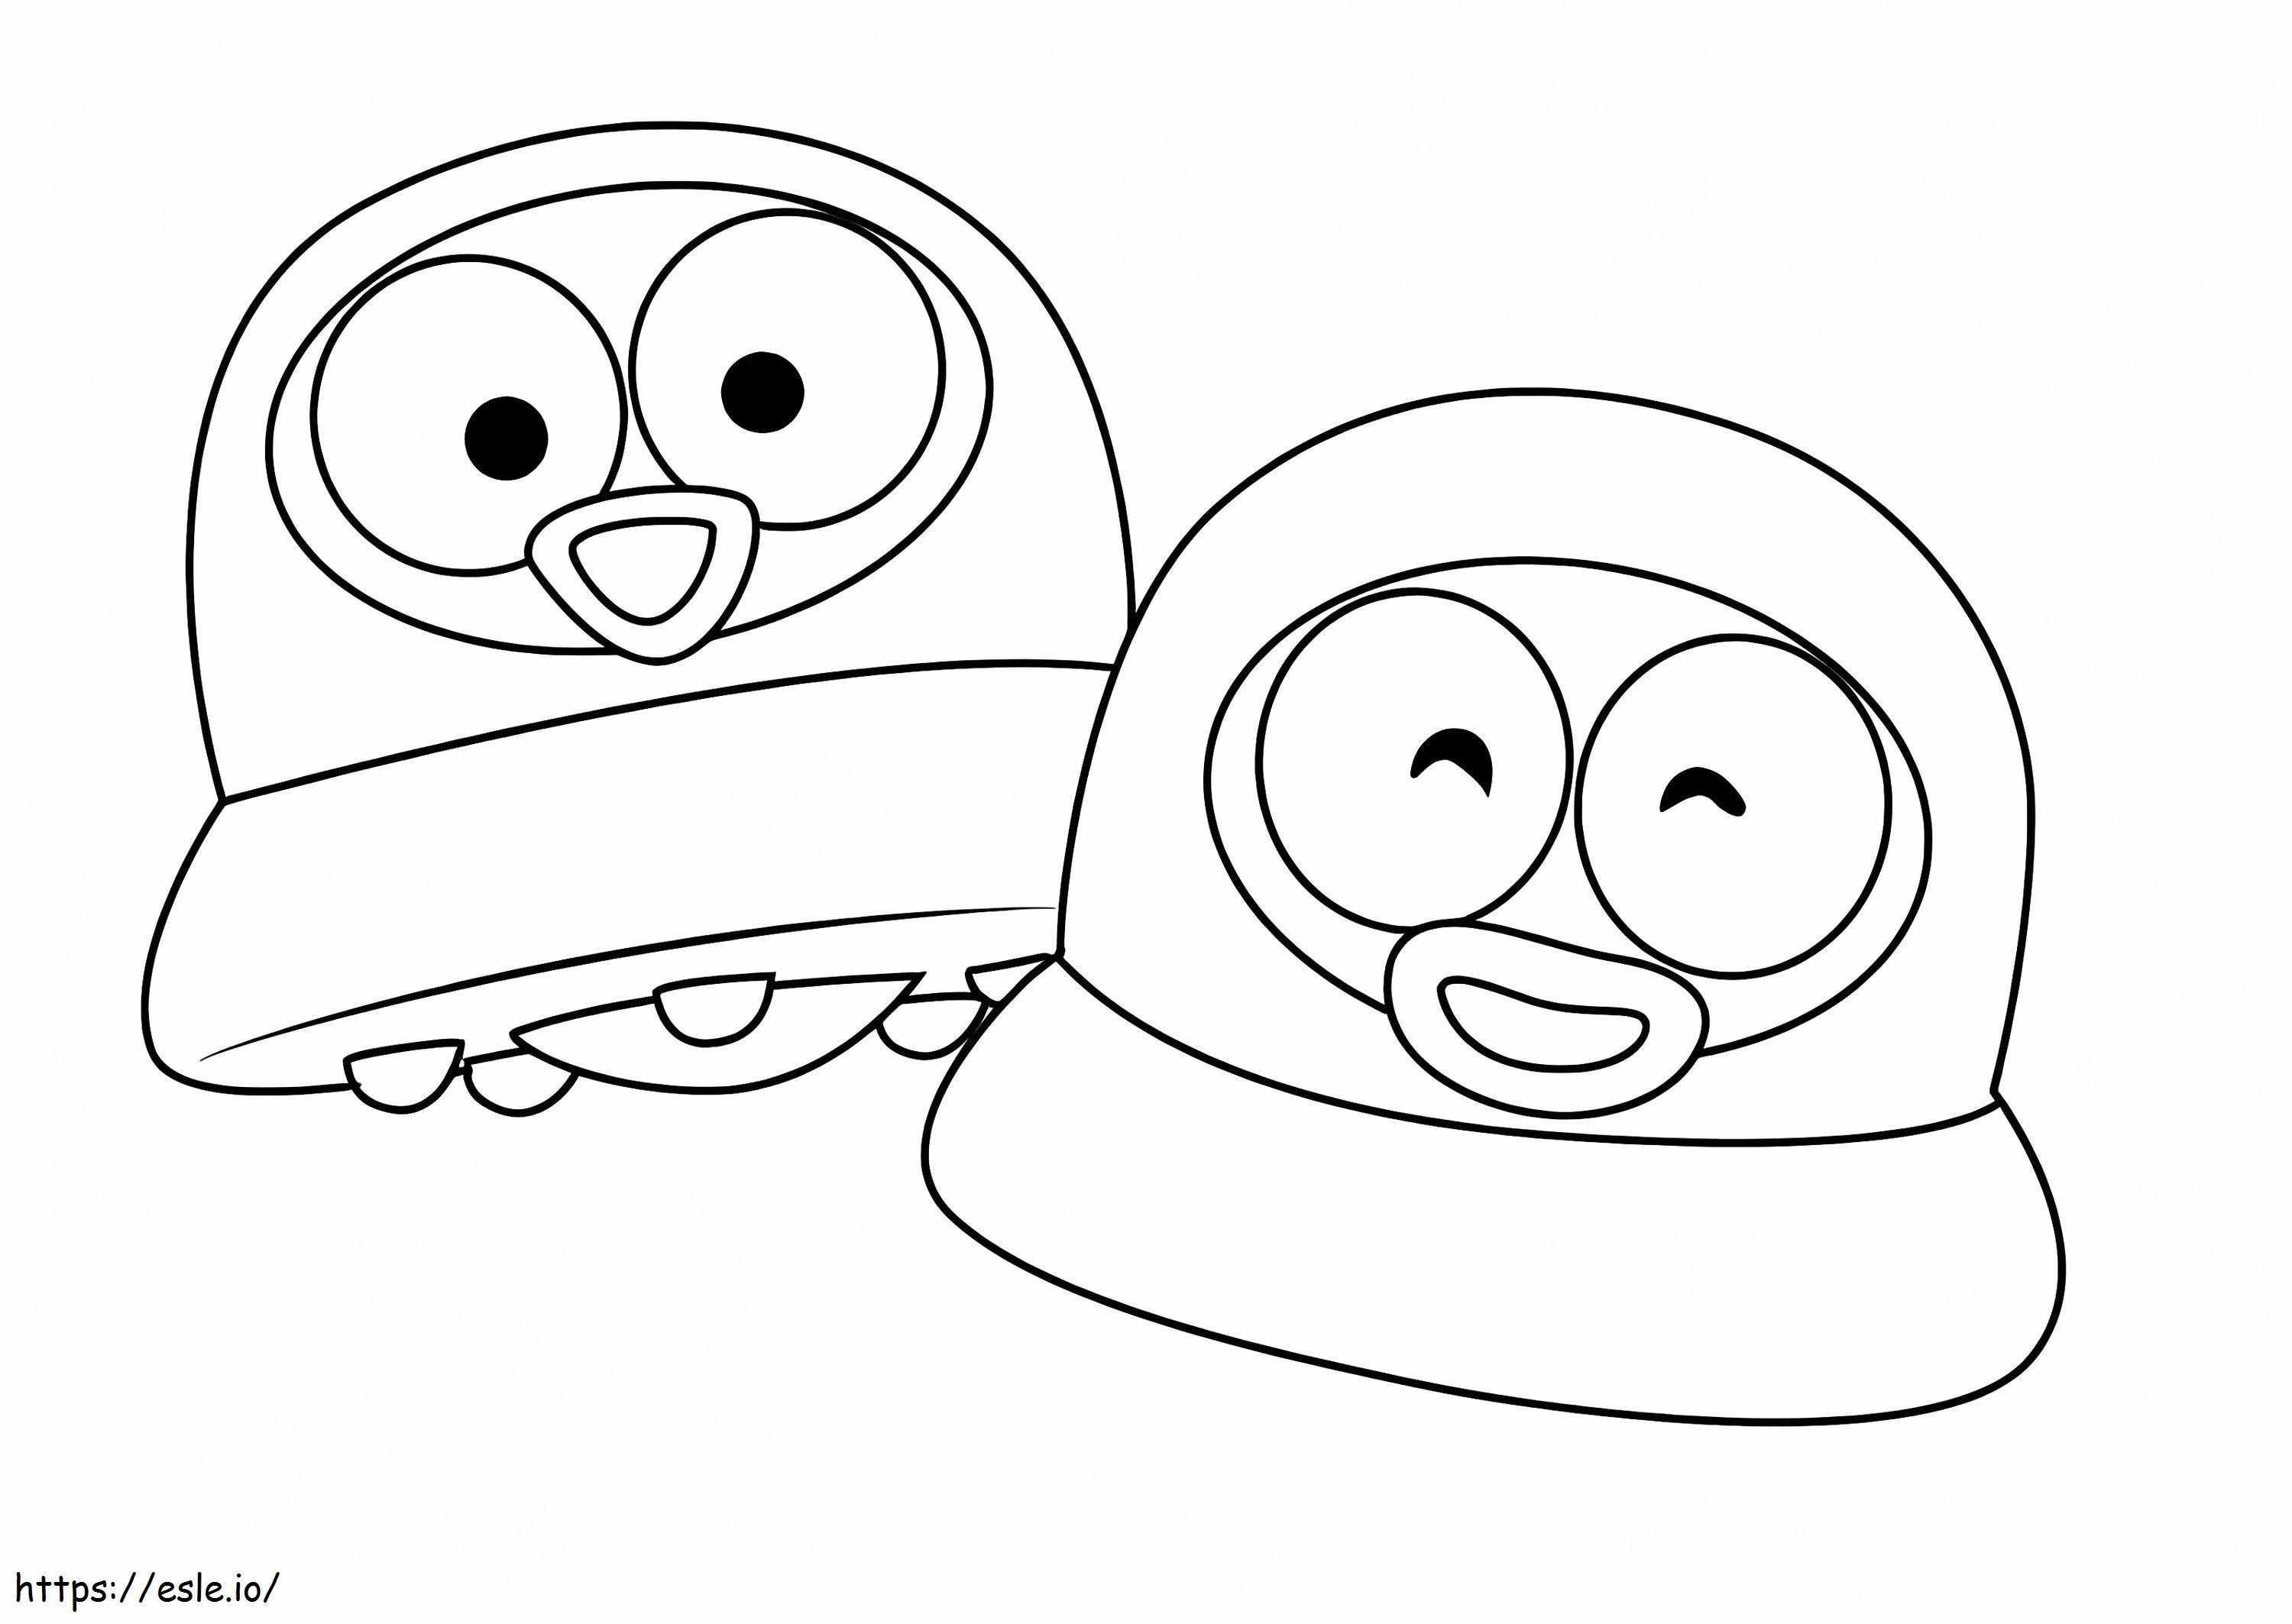 Poop And Pee coloring page